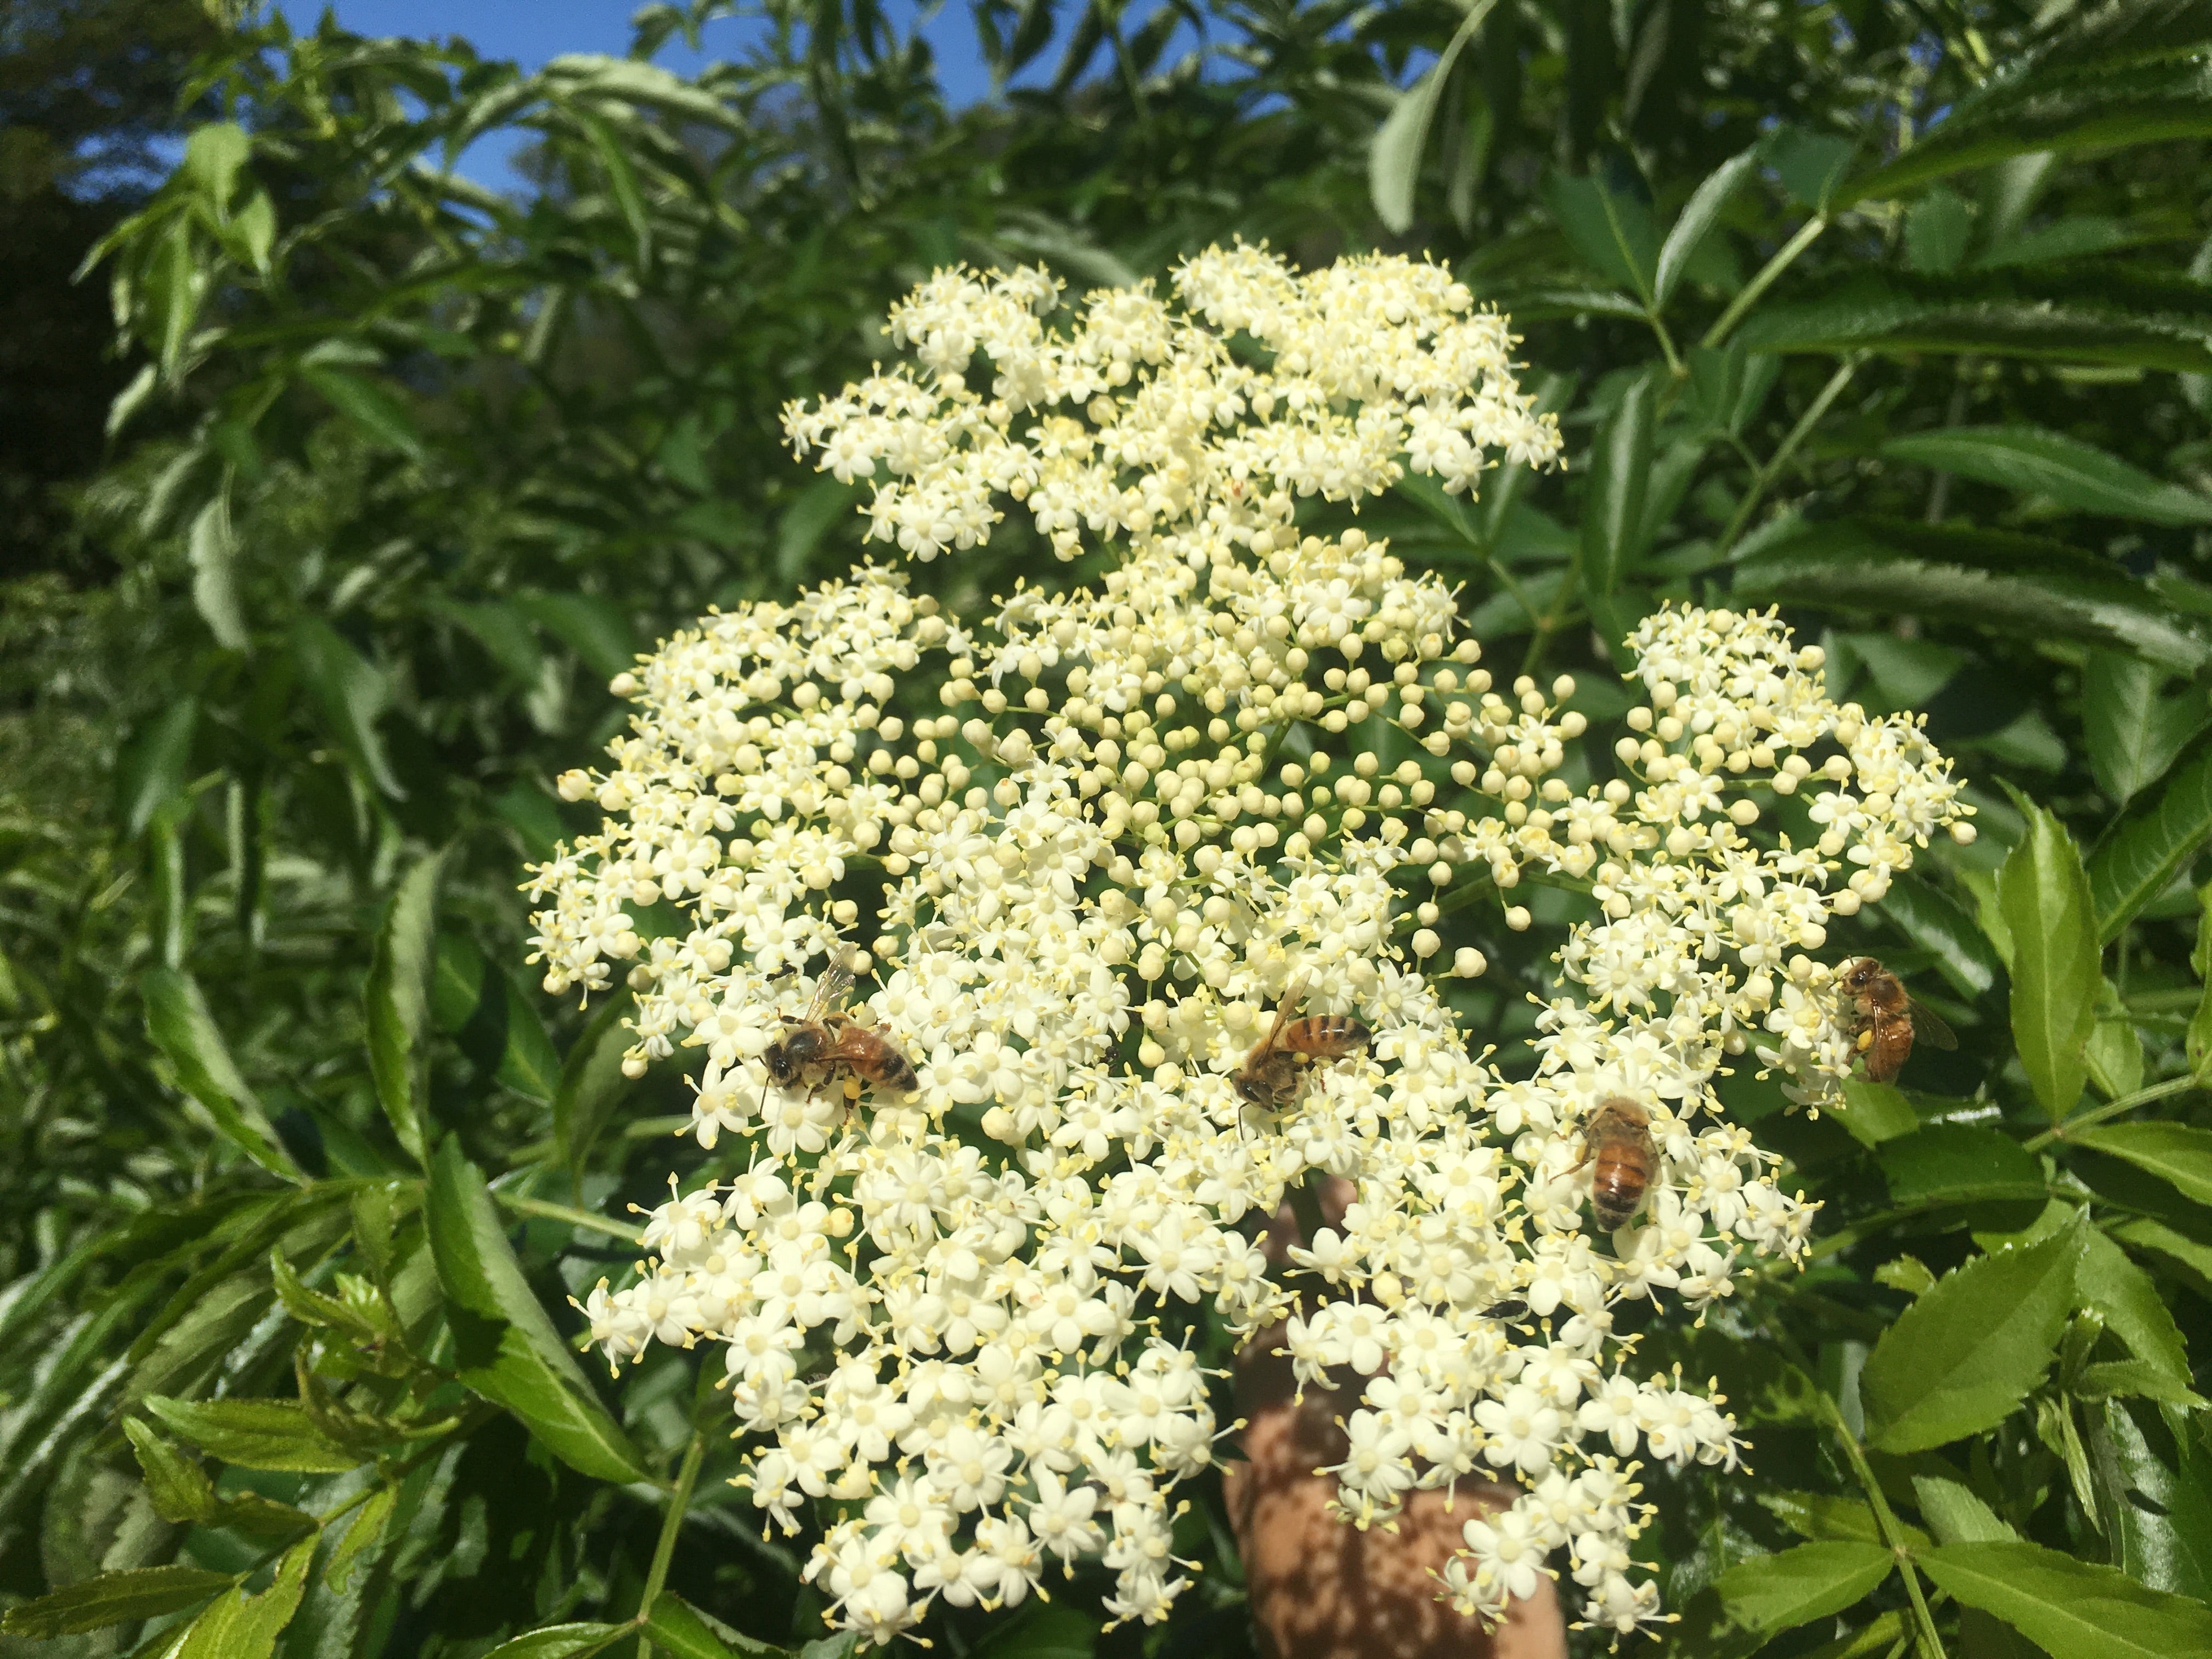 Elderberry Lore: Part 2 of Everything You Wanted to Know about Sambucus But Were Afraid To Ask